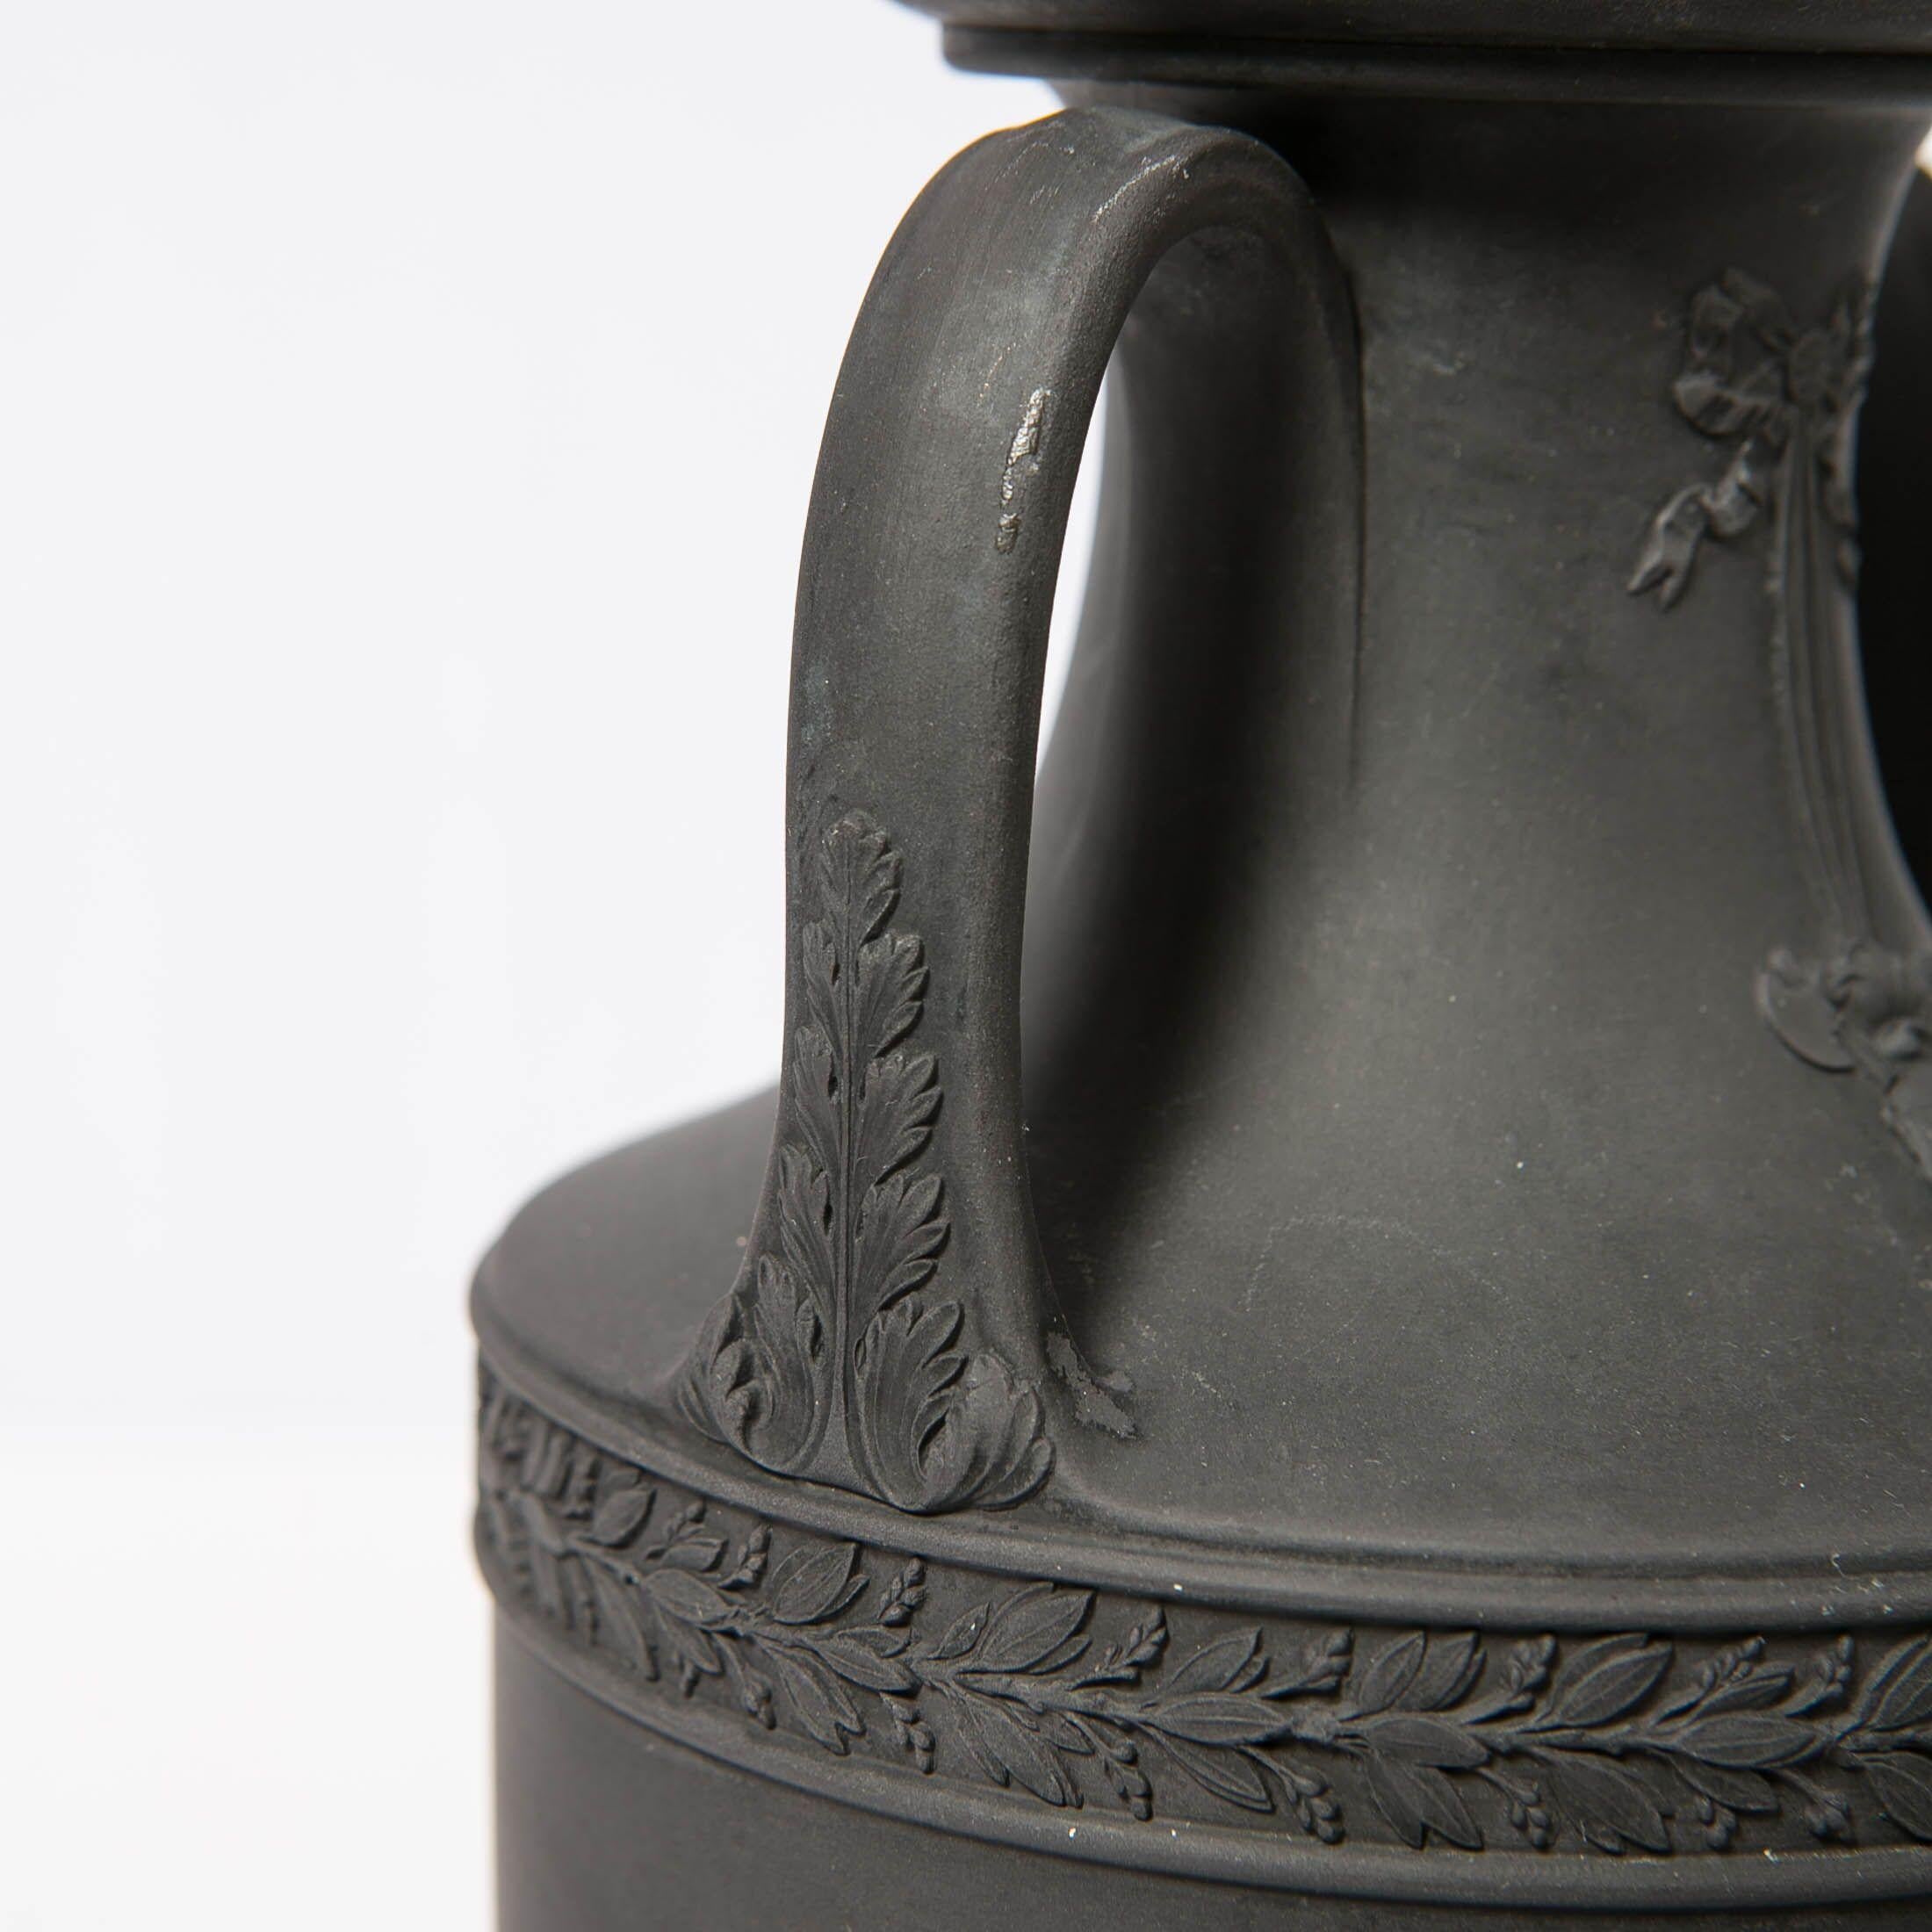 Molded Wedgwood Black Basalt Vase with Classical Figures Made in England, circa 1840